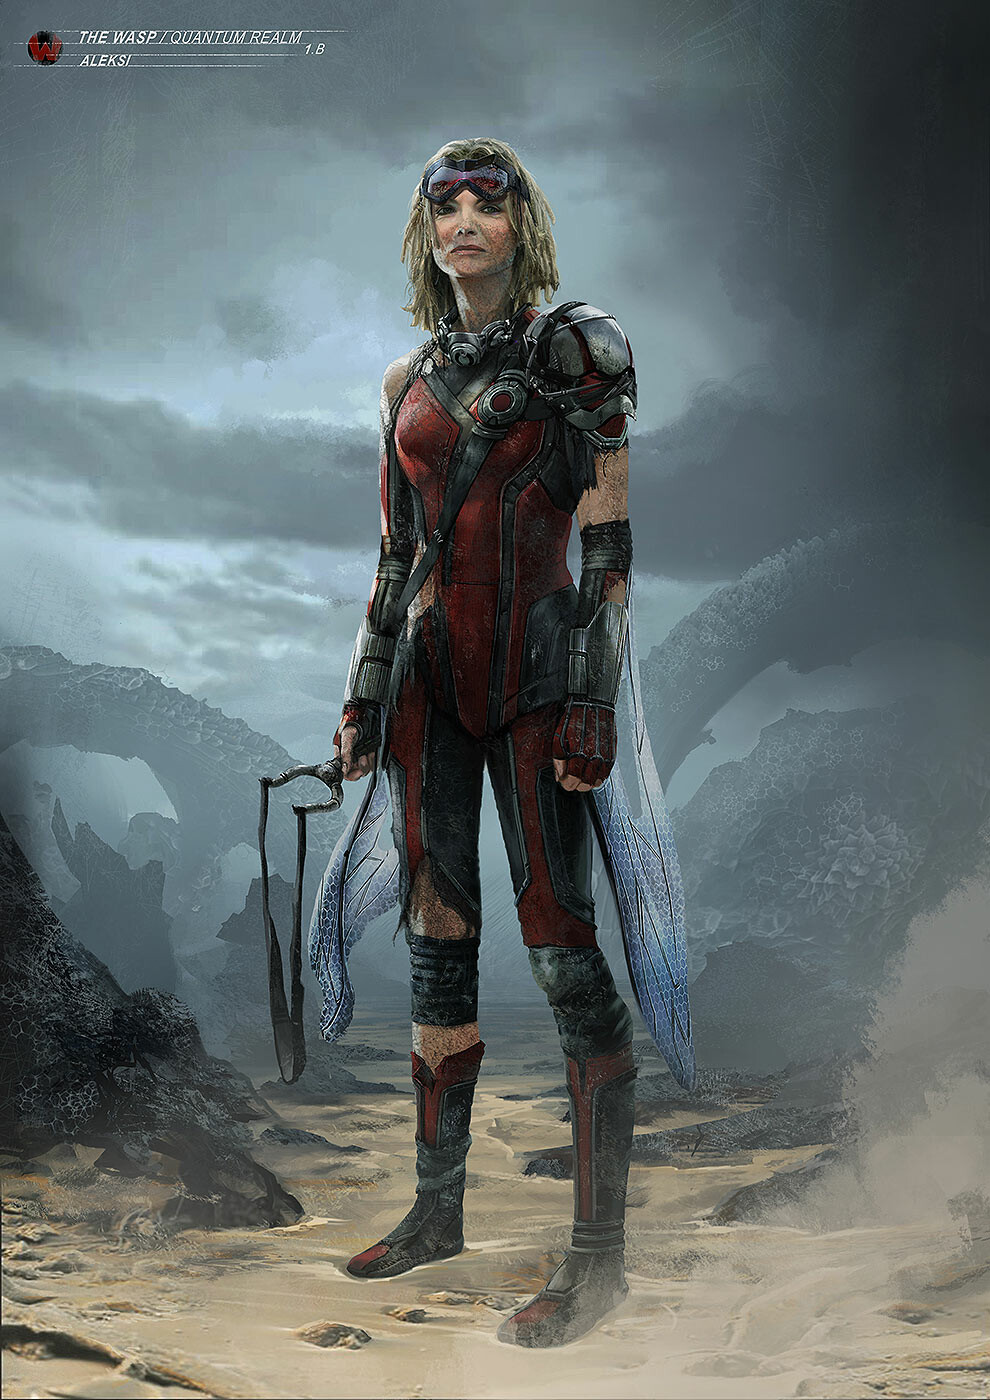 ArtStation - Antman and the Wasp / The Wasp in the Quantum Realm